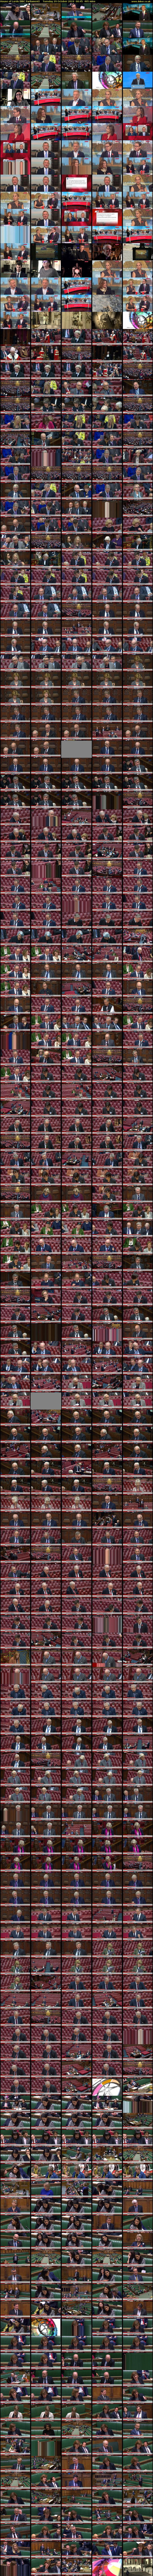 House of Lords (BBC Parliament) Tuesday 29 October 2019 00:45 - 09:00